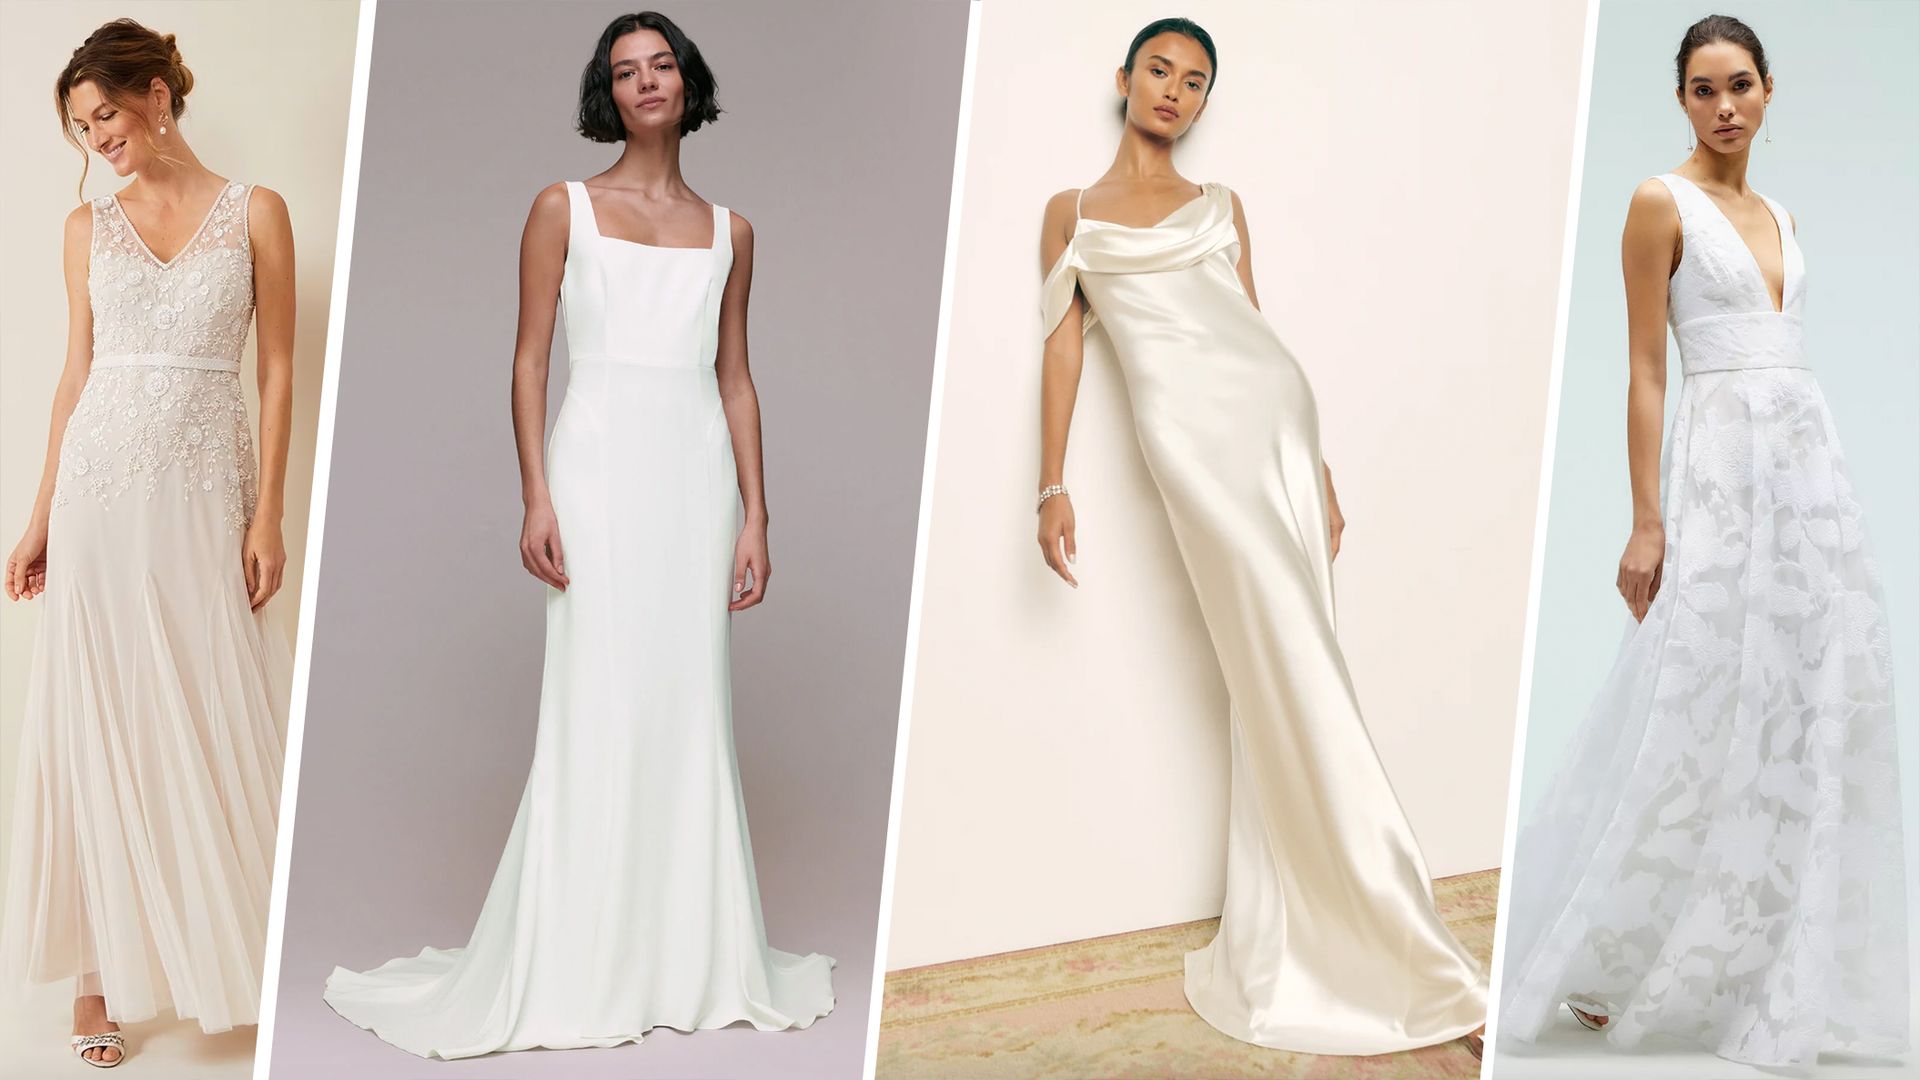 12 casual wedding dresses for a low-key ceremony